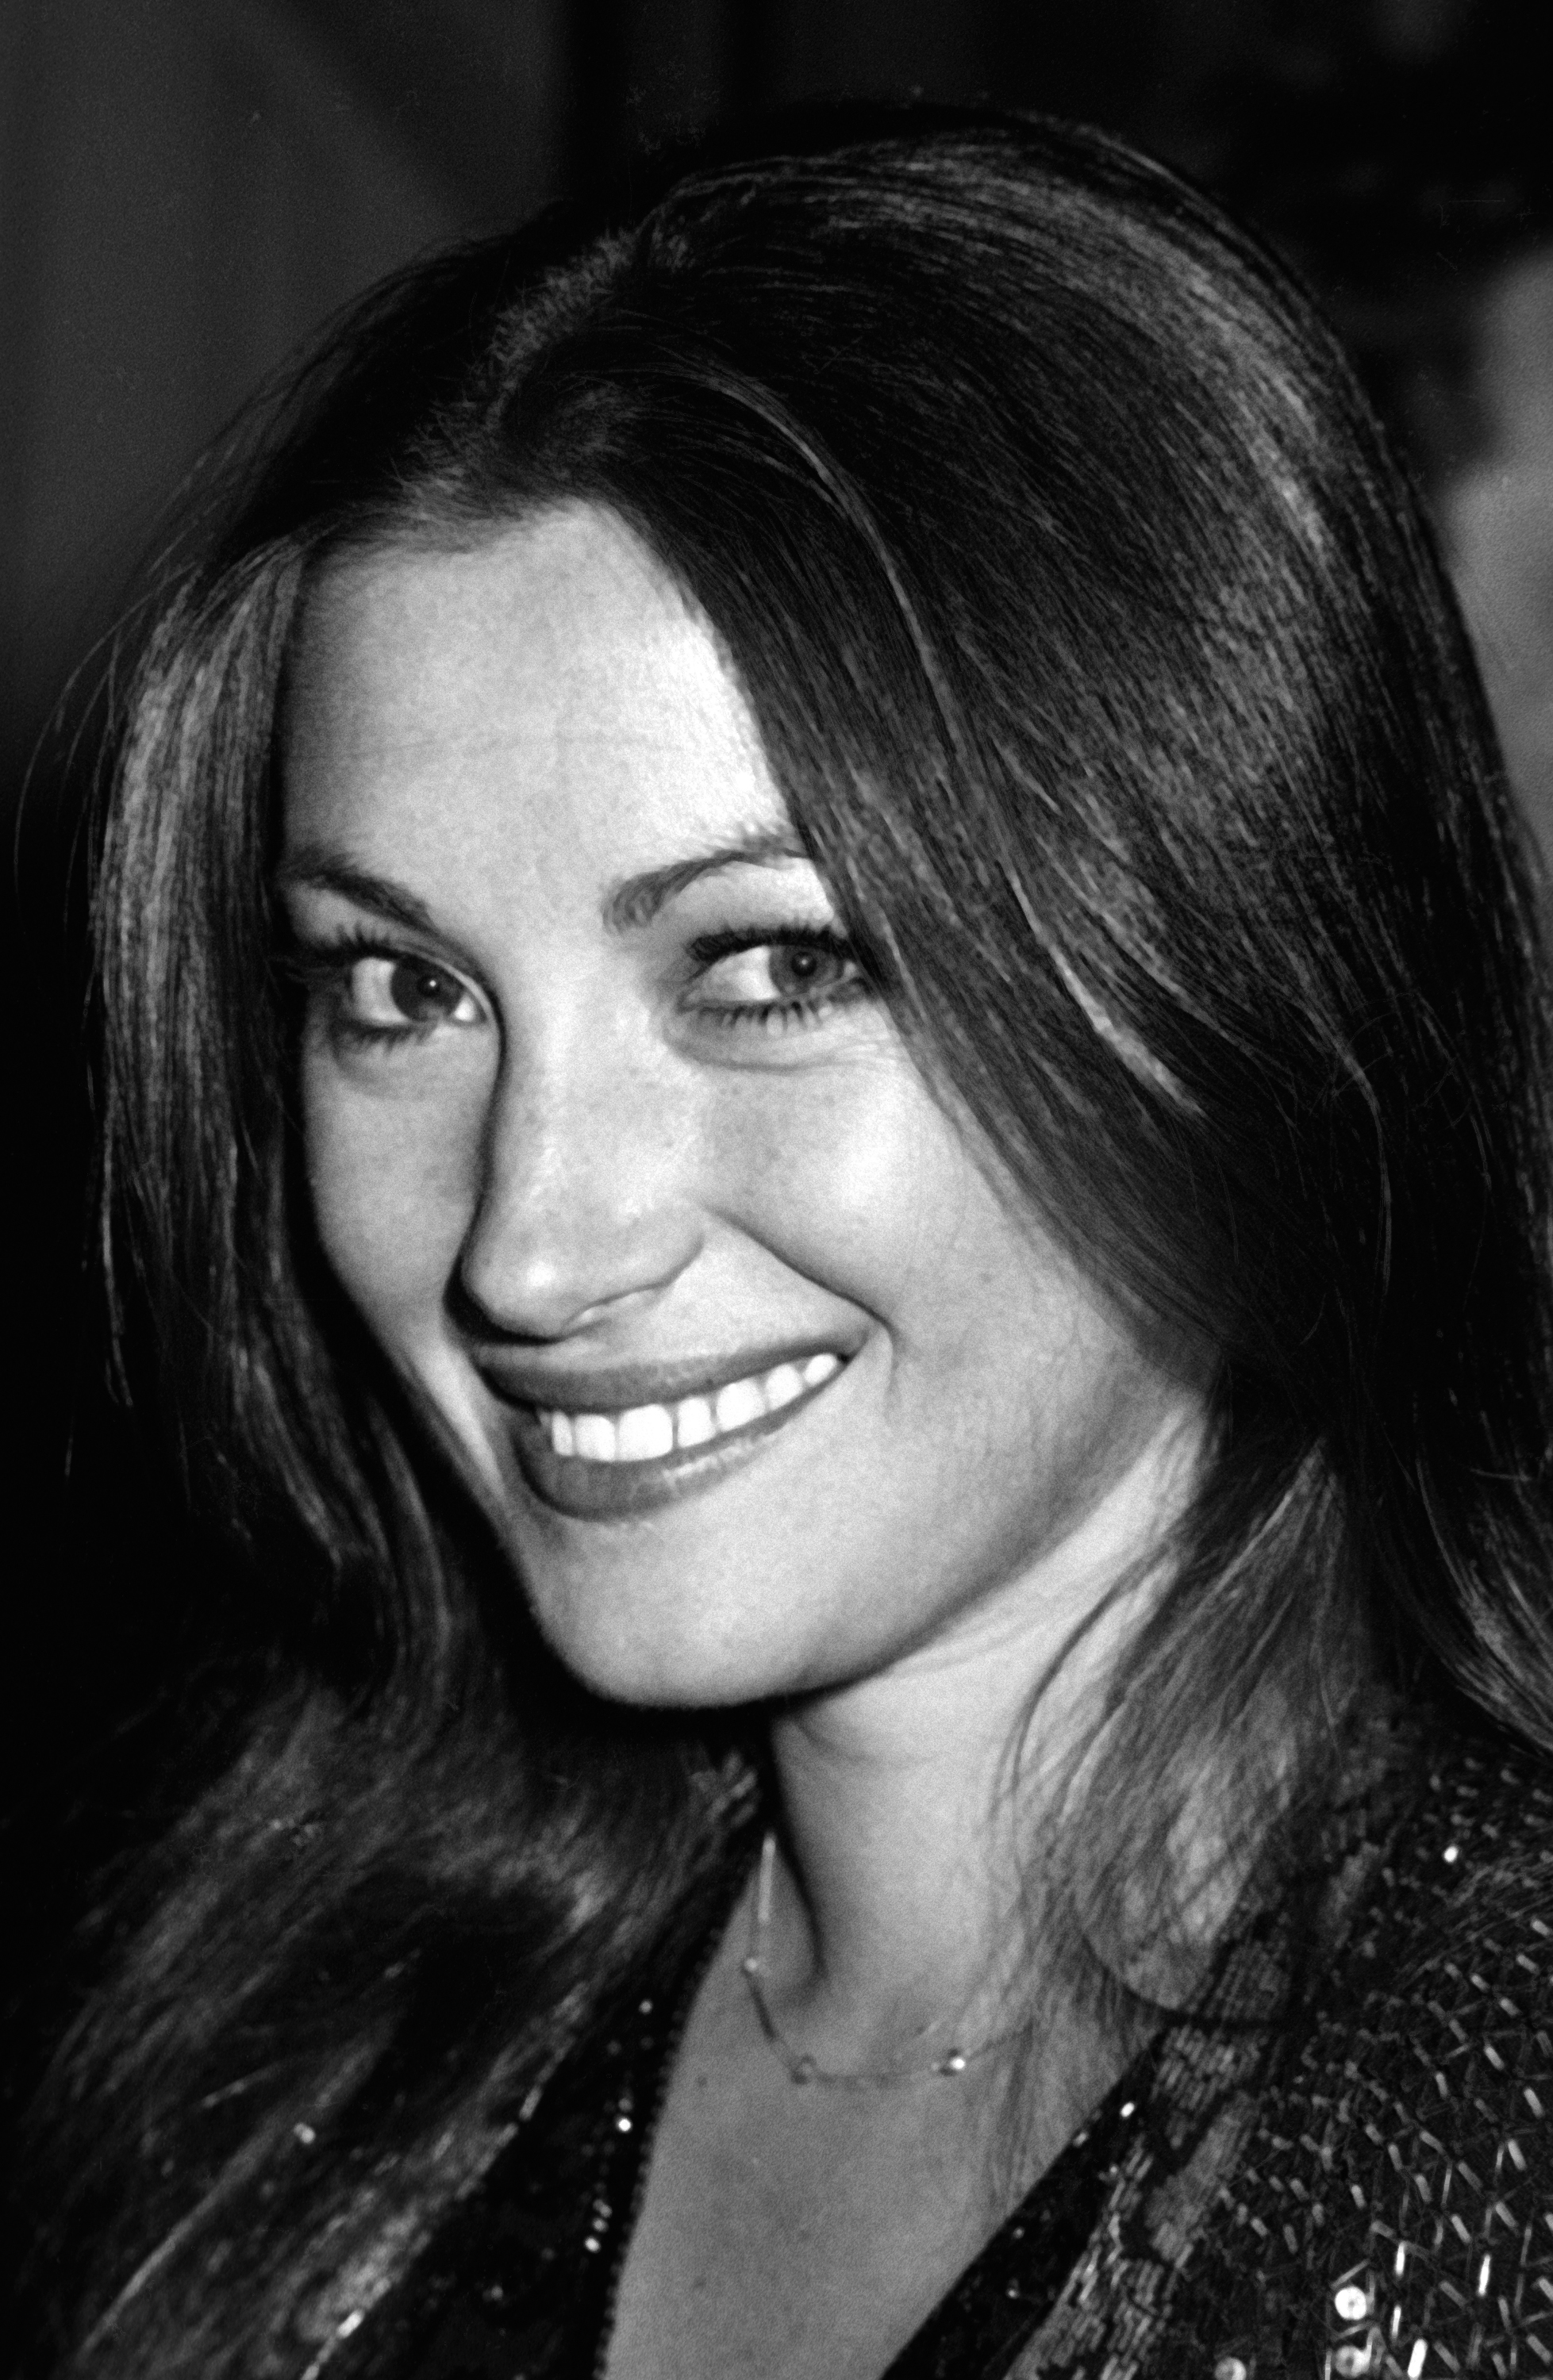 Jane Seymour at the Premiere Party for "Hide In Plain Sight" on March 17, 1980 | Source: Getty Images